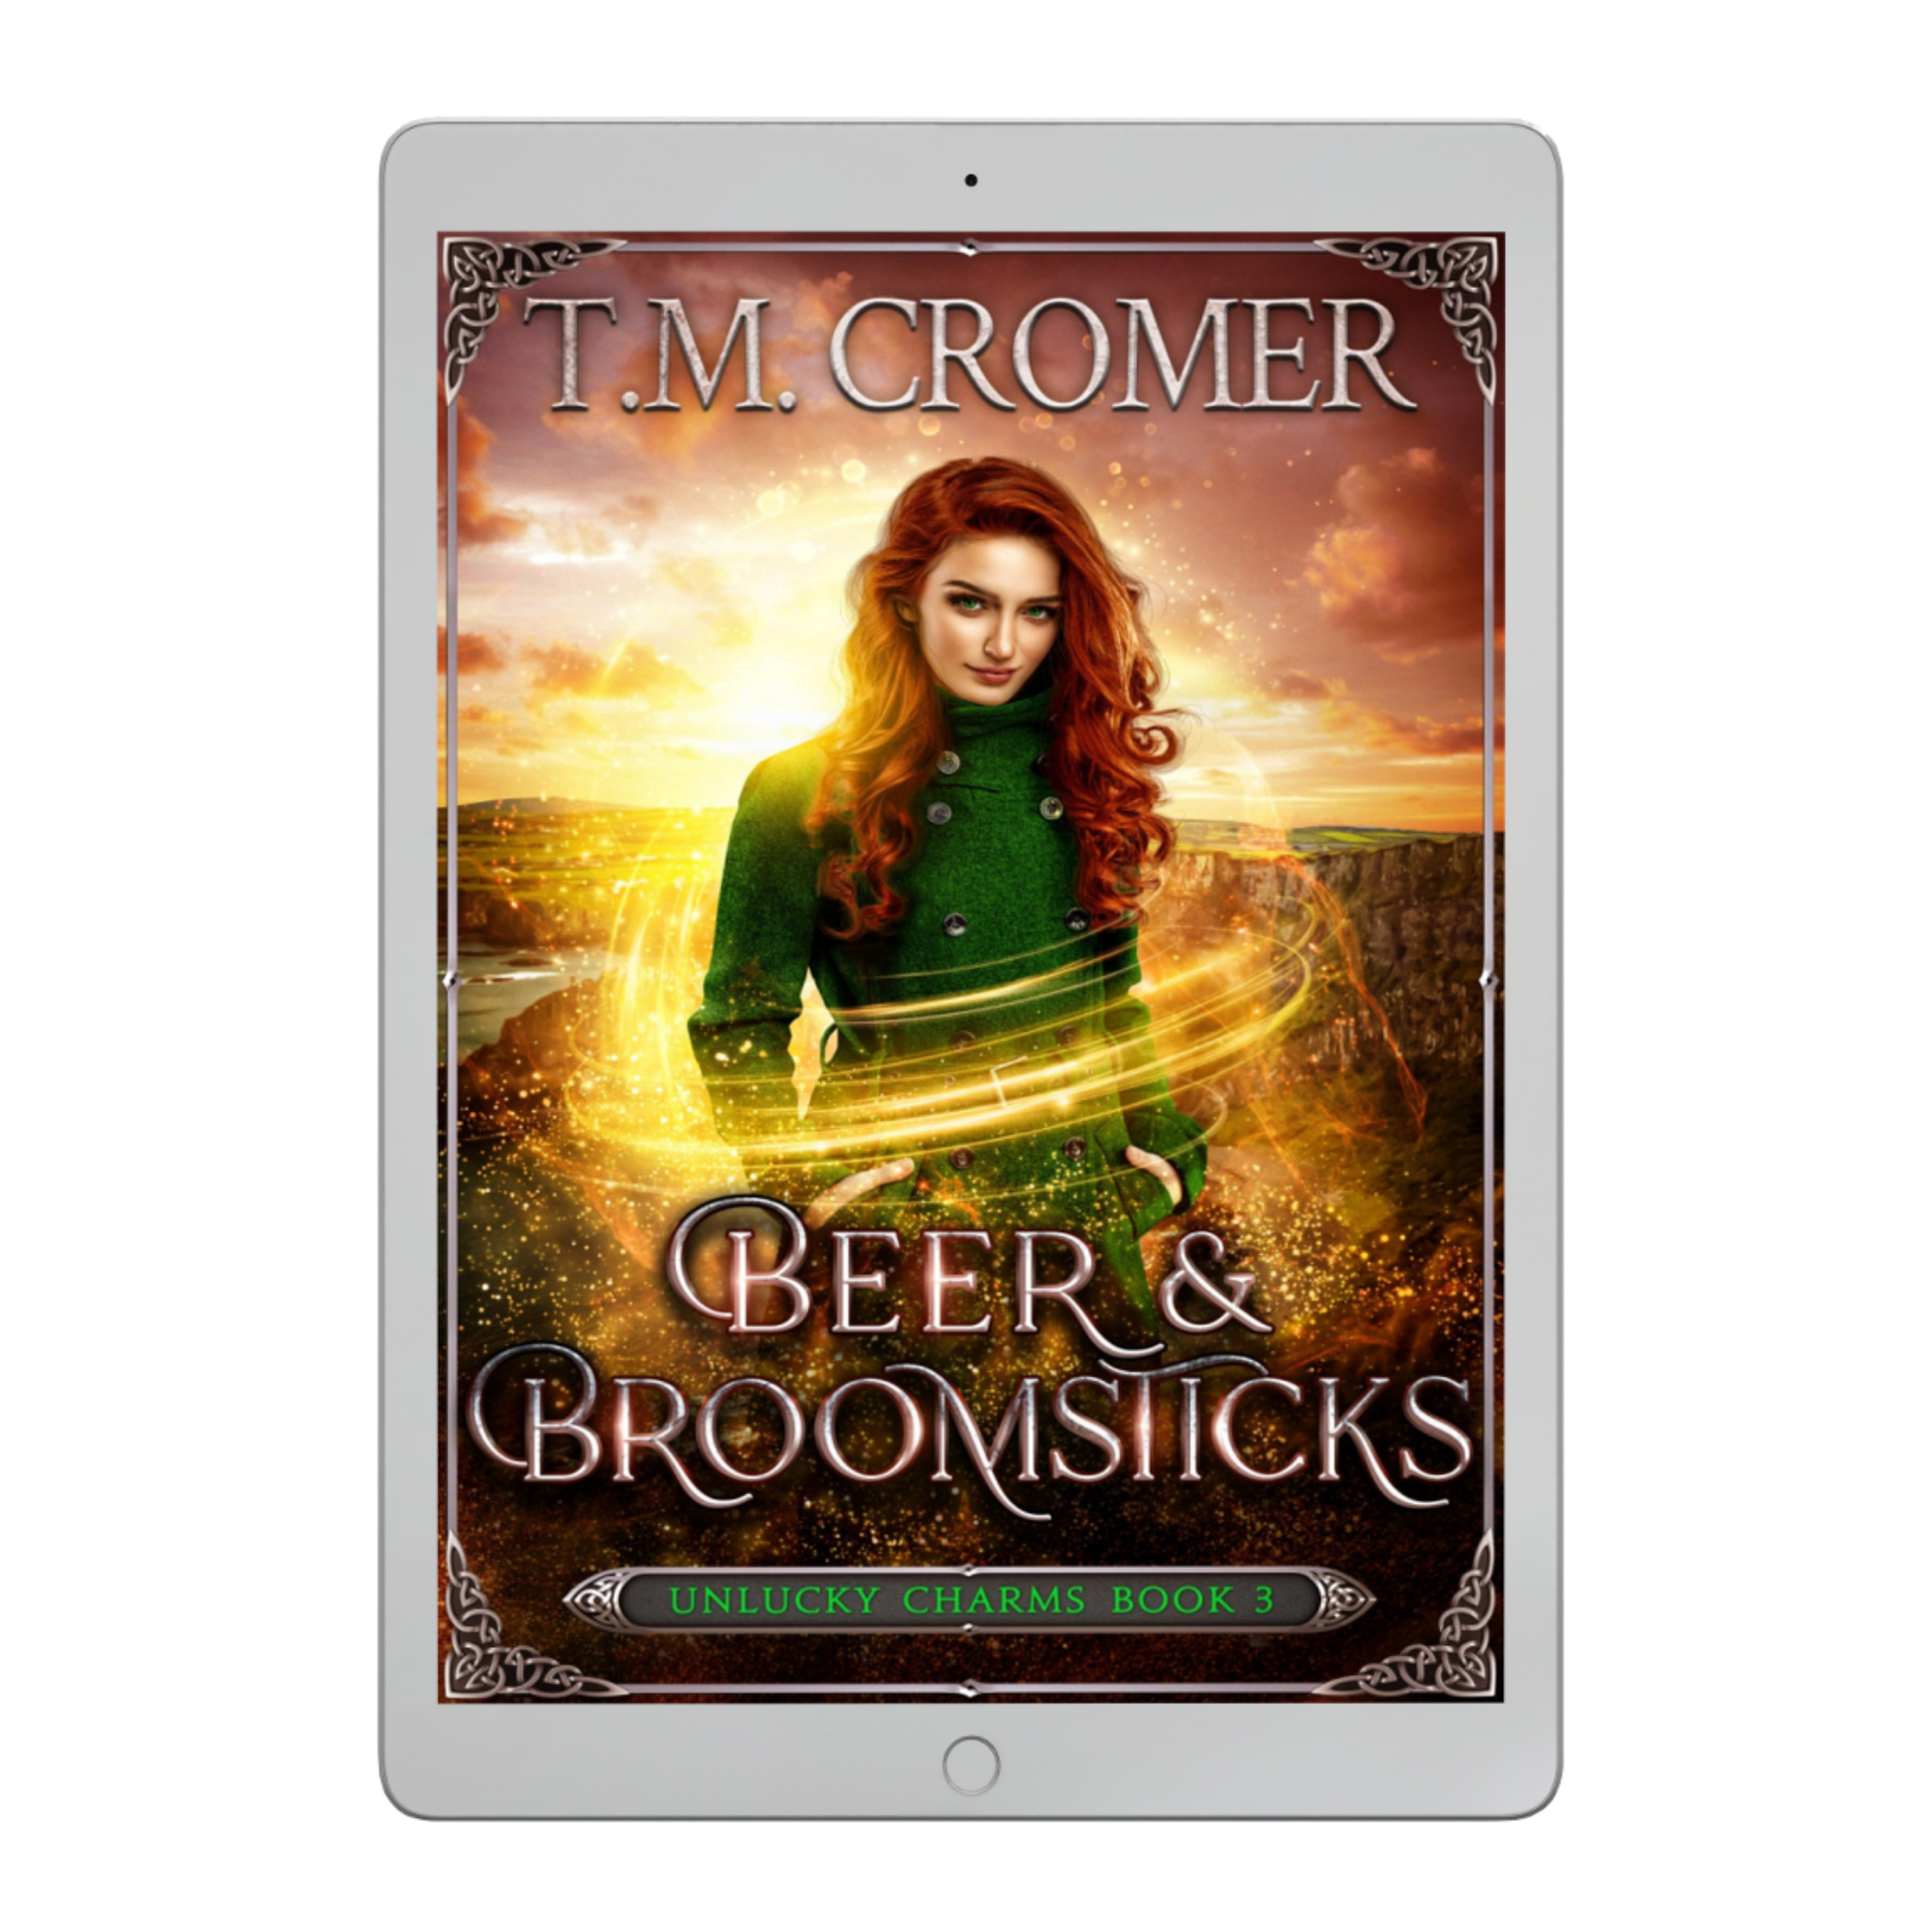  Beer and Broomsticks Unlucky Charms #3 Ebook Paranormal Romance Urban Fantasy Magical Realism Irish Adventure Witches and Warlocks